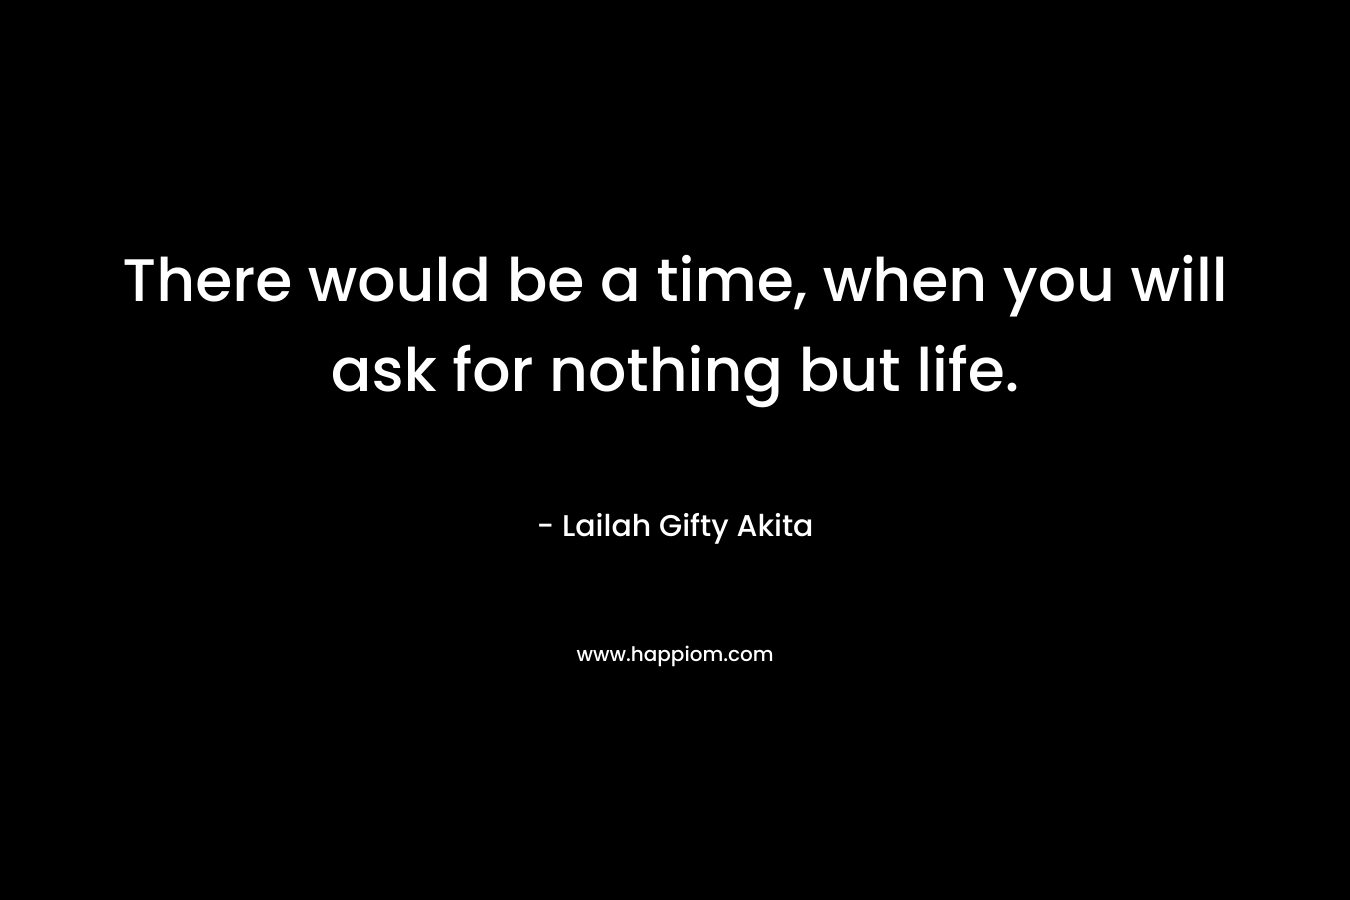 There would be a time, when you will ask for nothing but life.